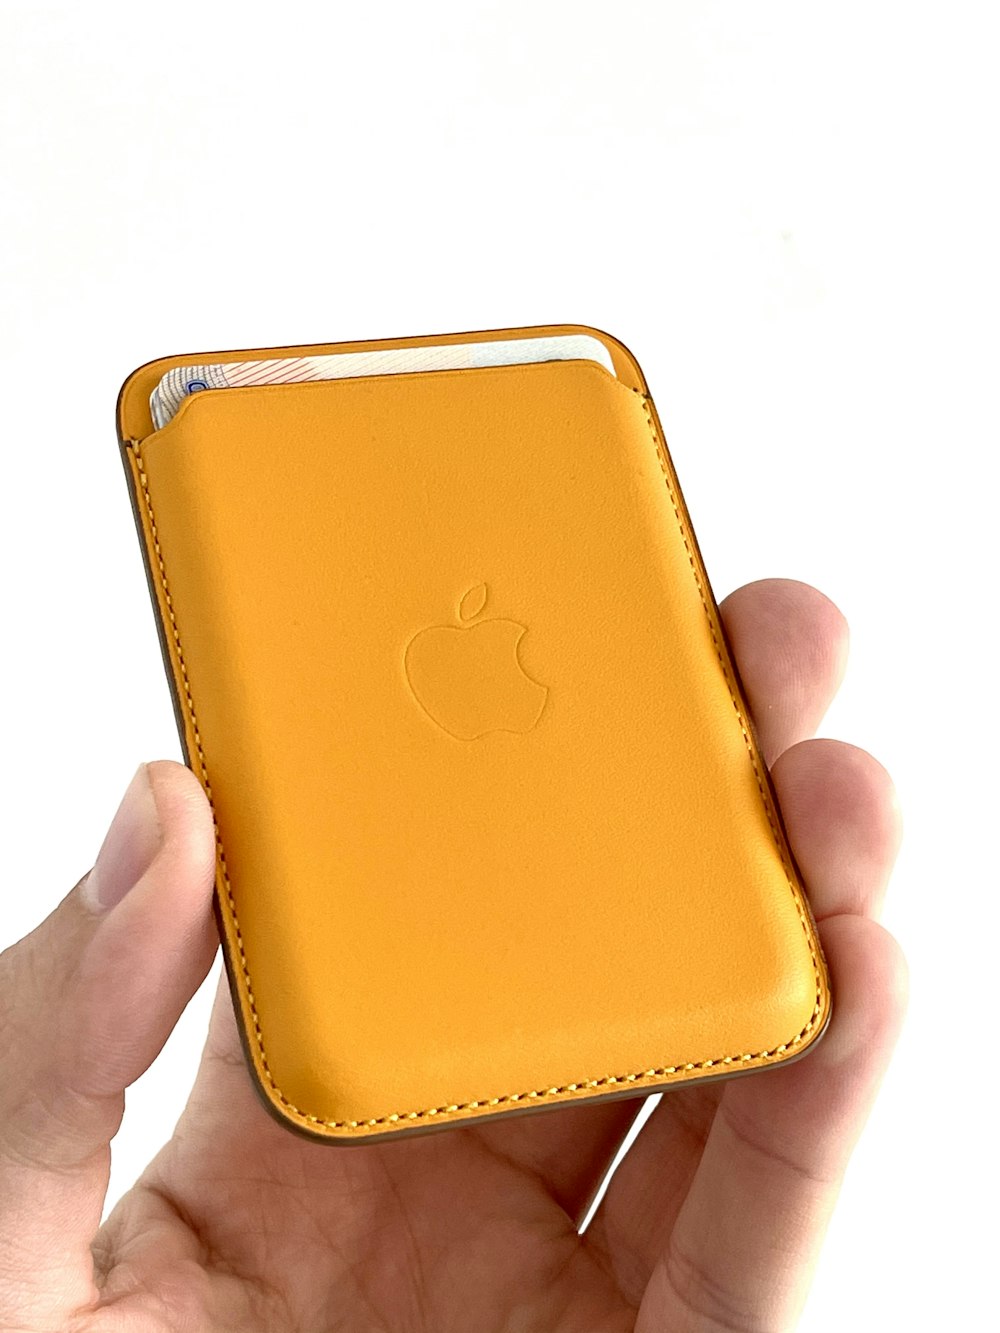 person holding gold apple iphone case